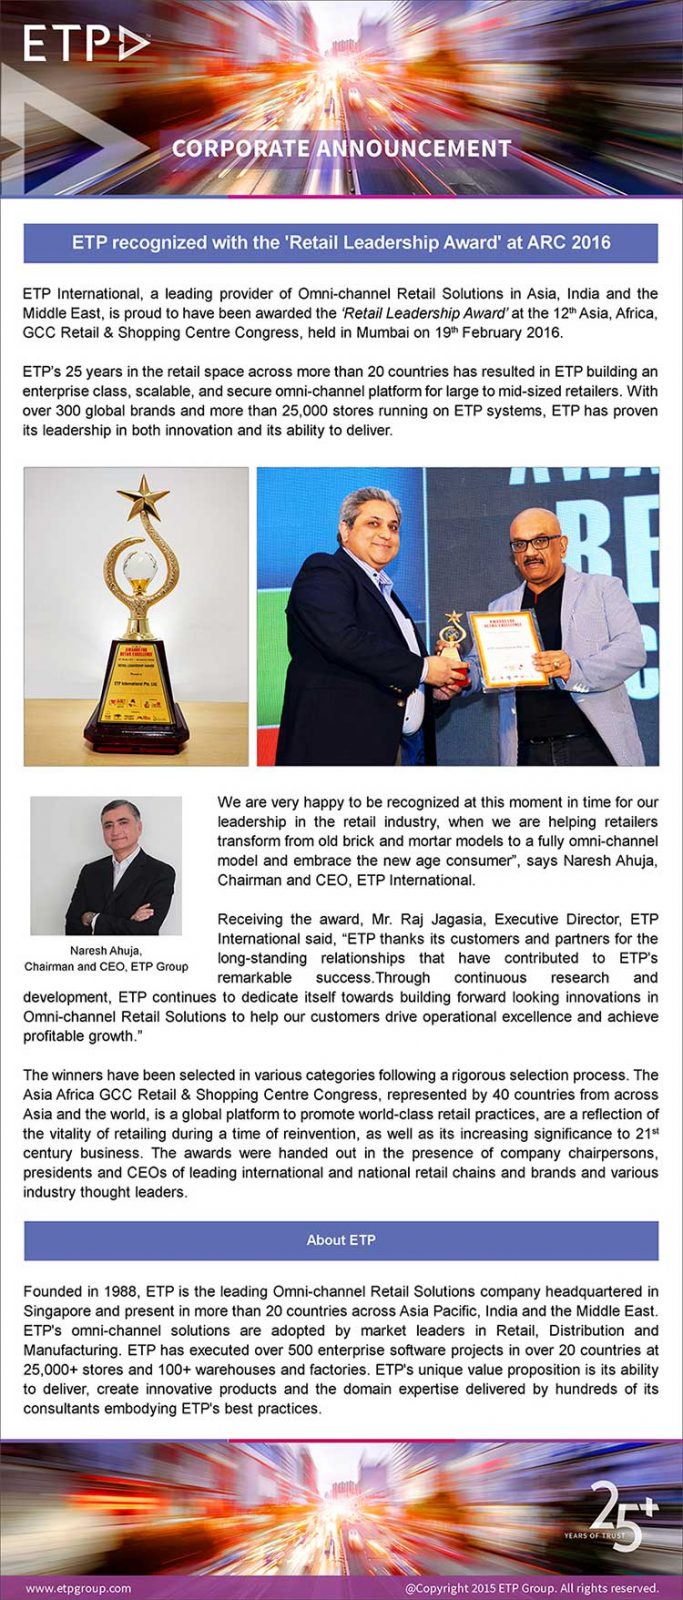 ETP recognized with the ´Retail Leadership Award´ at ARC 2016